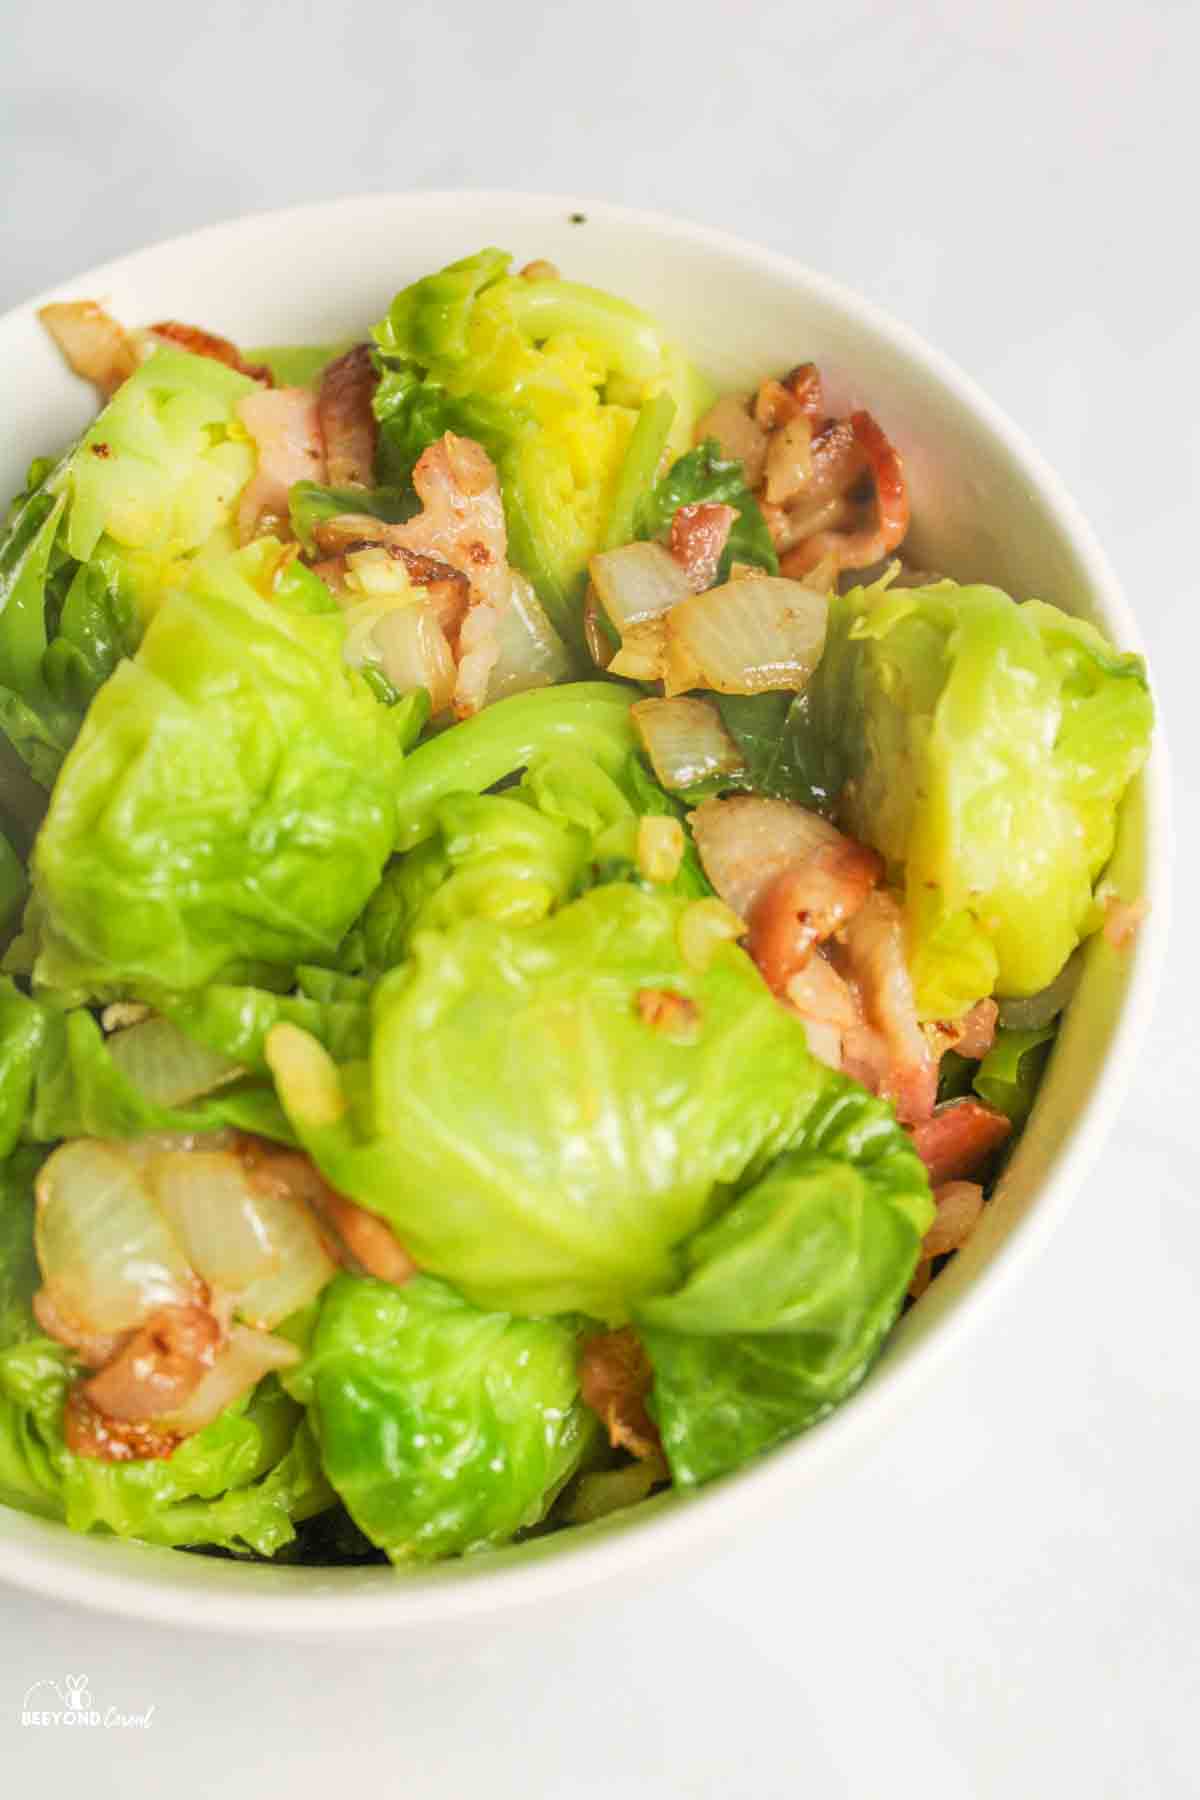 bacon and brussel sprouts in a bowl.